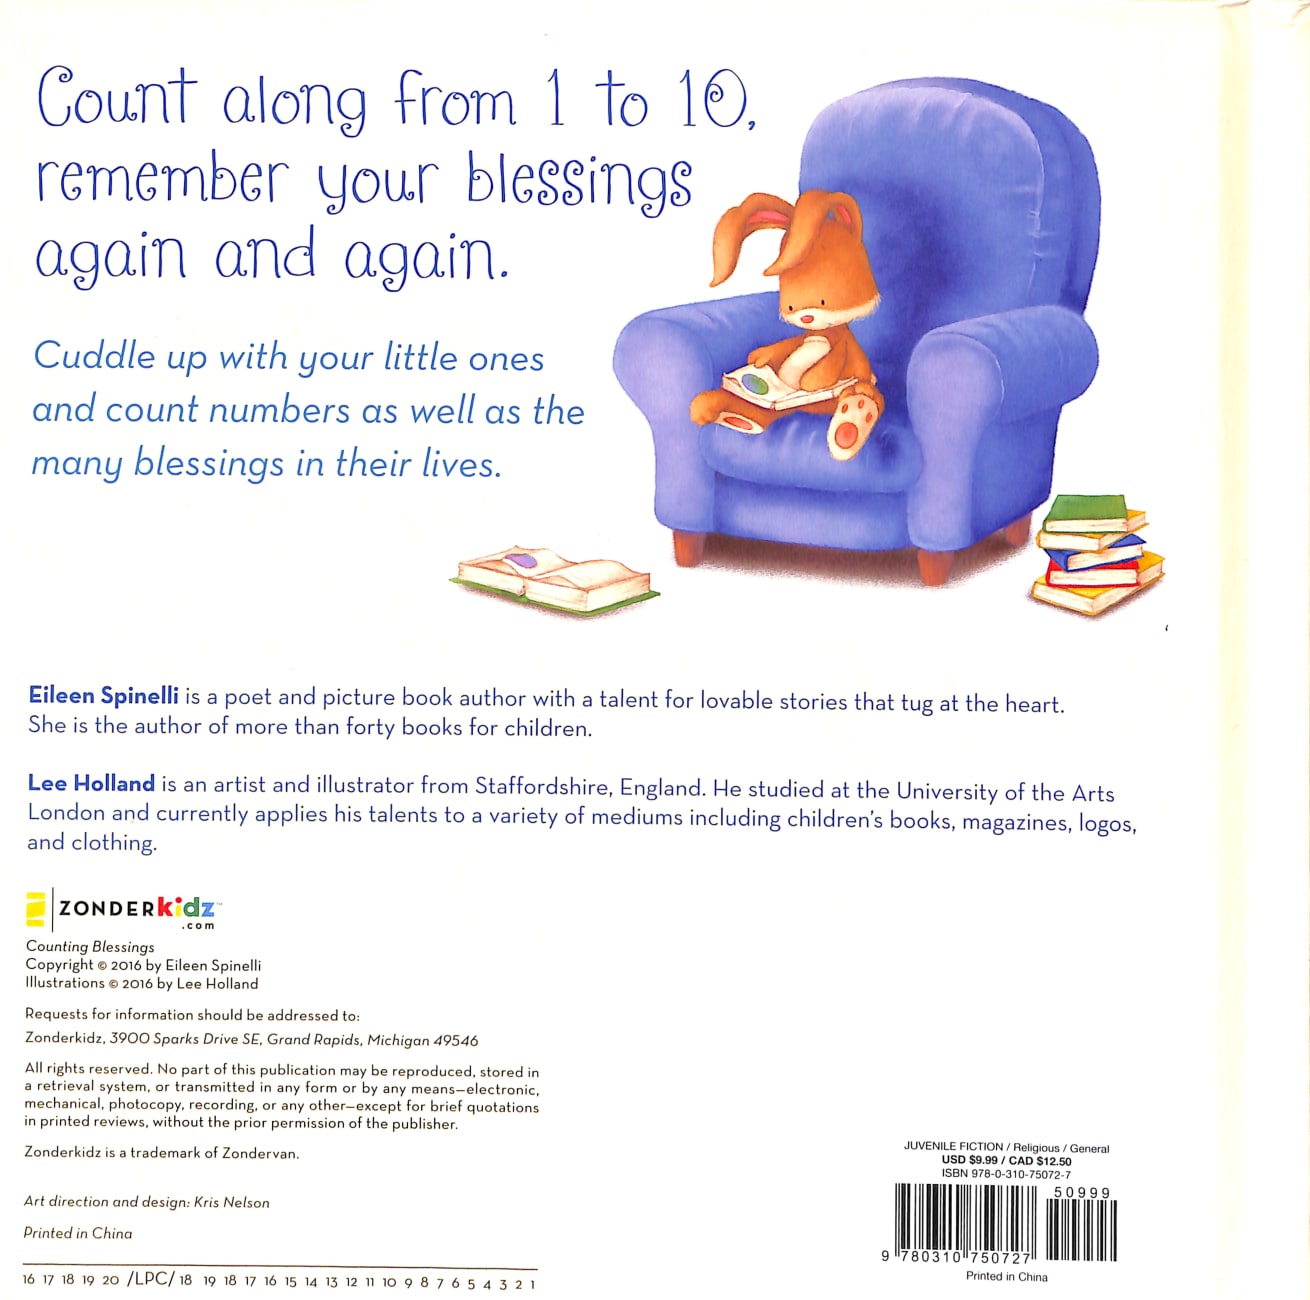 Counting Blessings Board Book